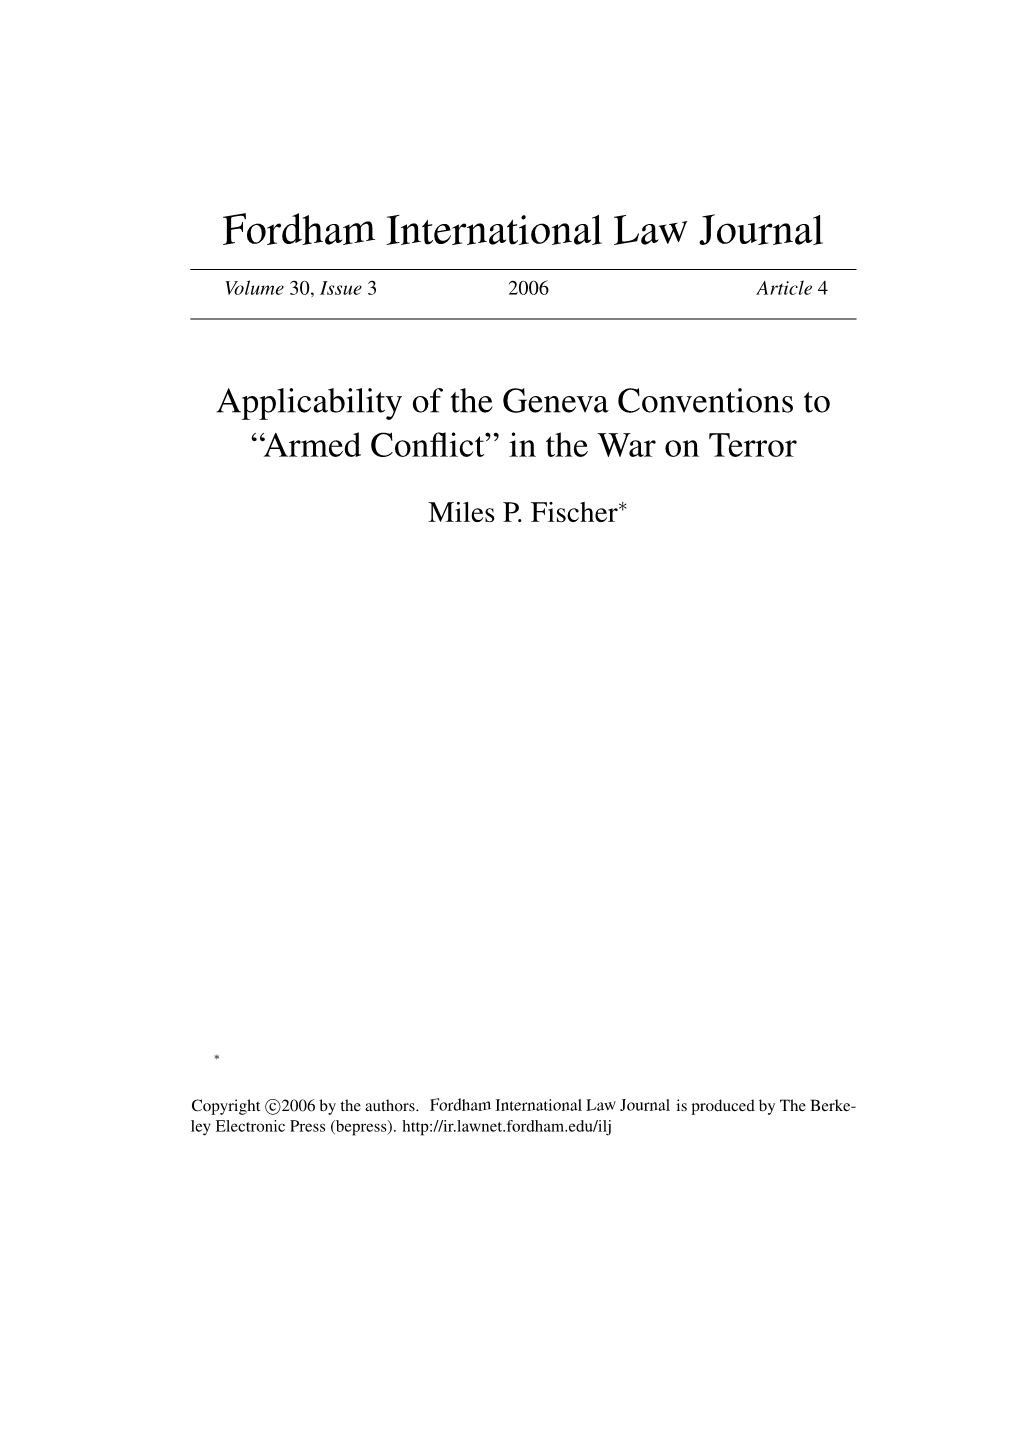 Applicability of the Geneva Conventions to “Armed Conﬂict” in the War on Terror